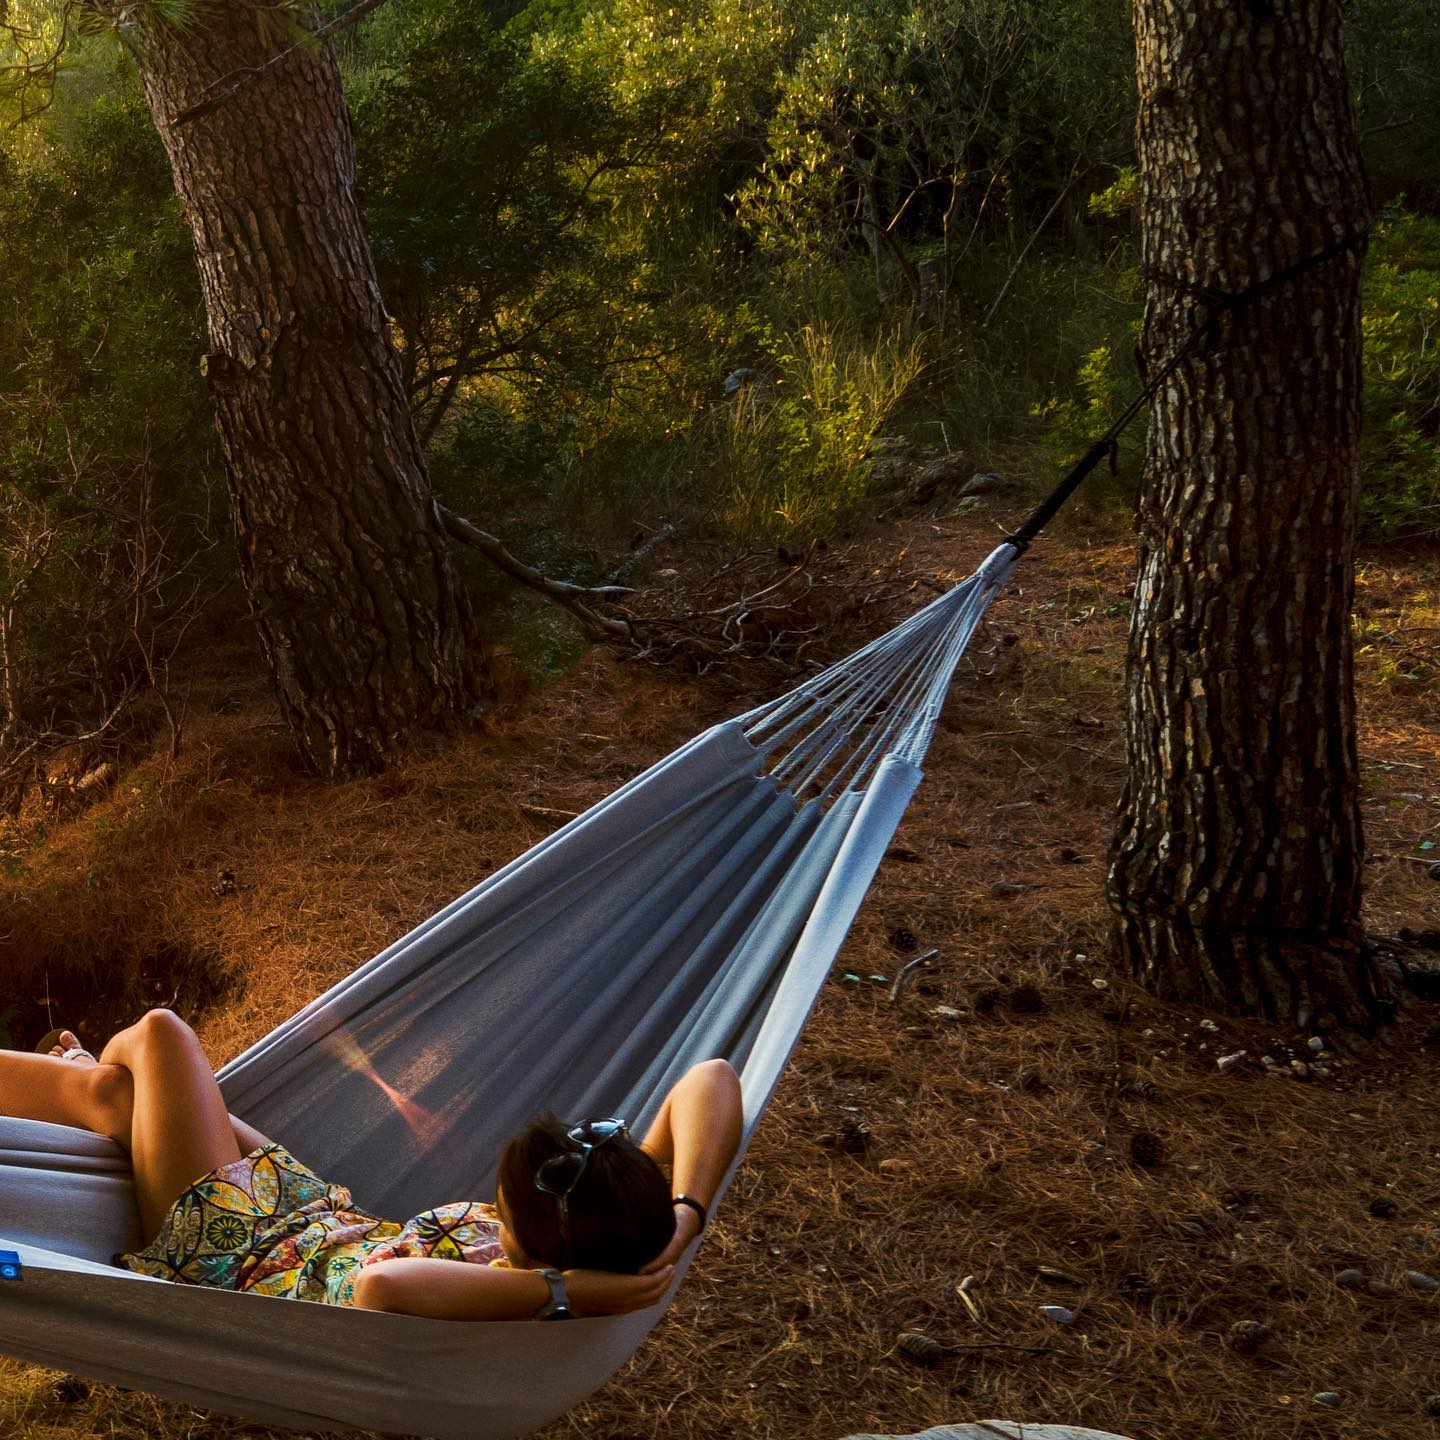 A hammock in a pine forest